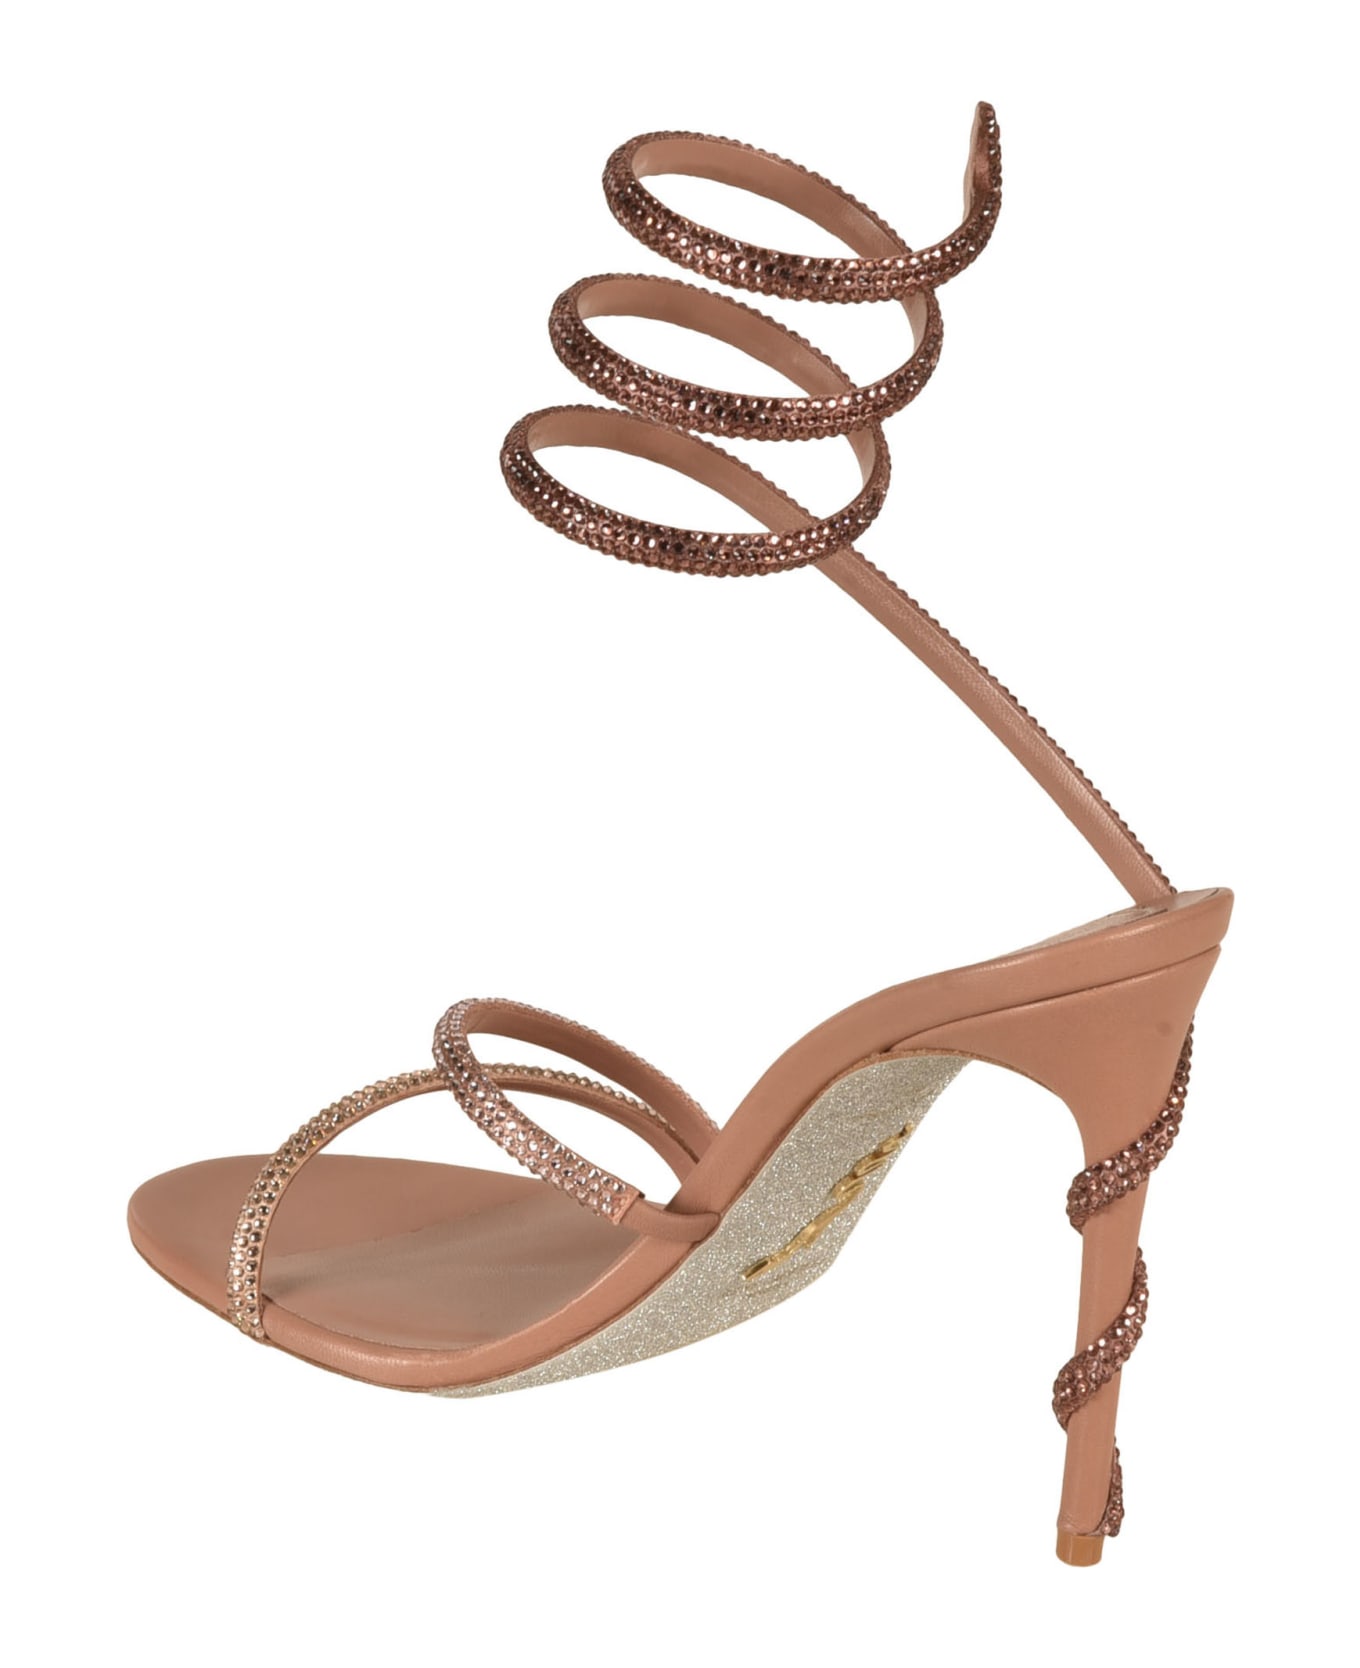 René Caovilla Embellished Ankle Wrap Sandals - Pink サンダル